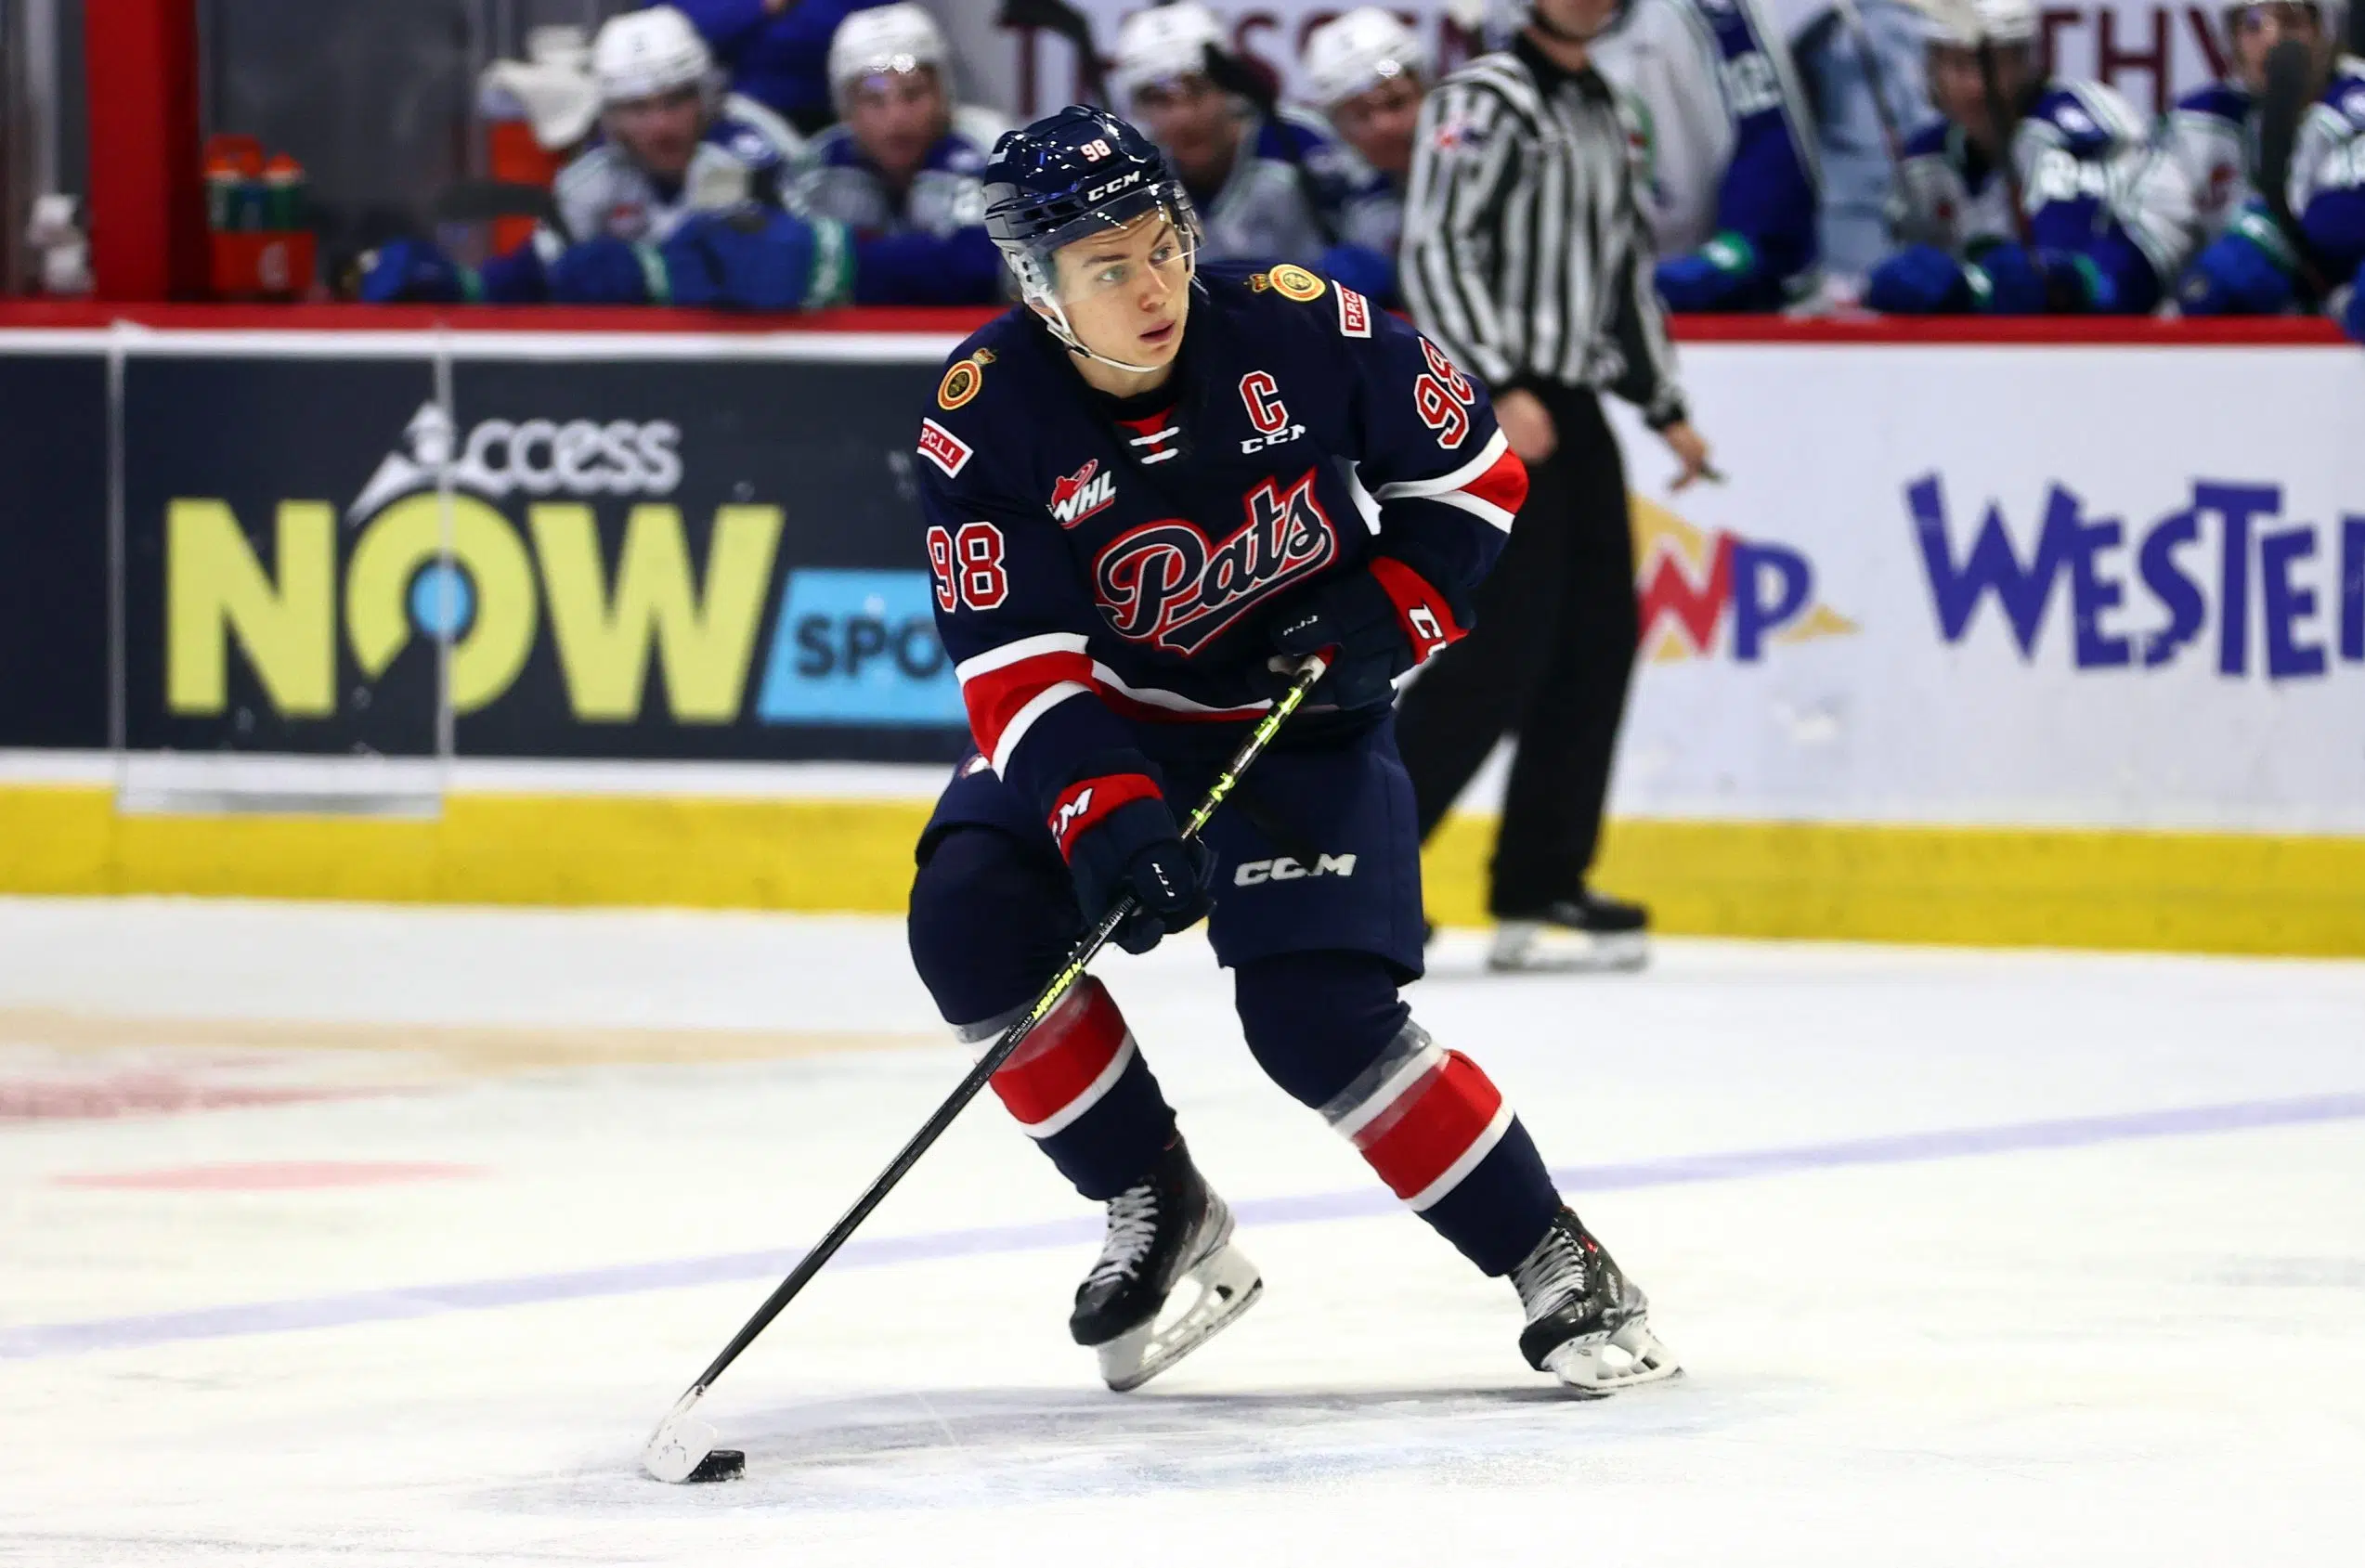 Pats’ Bedard claims second straight monthly award from WHL | 650 CKOM